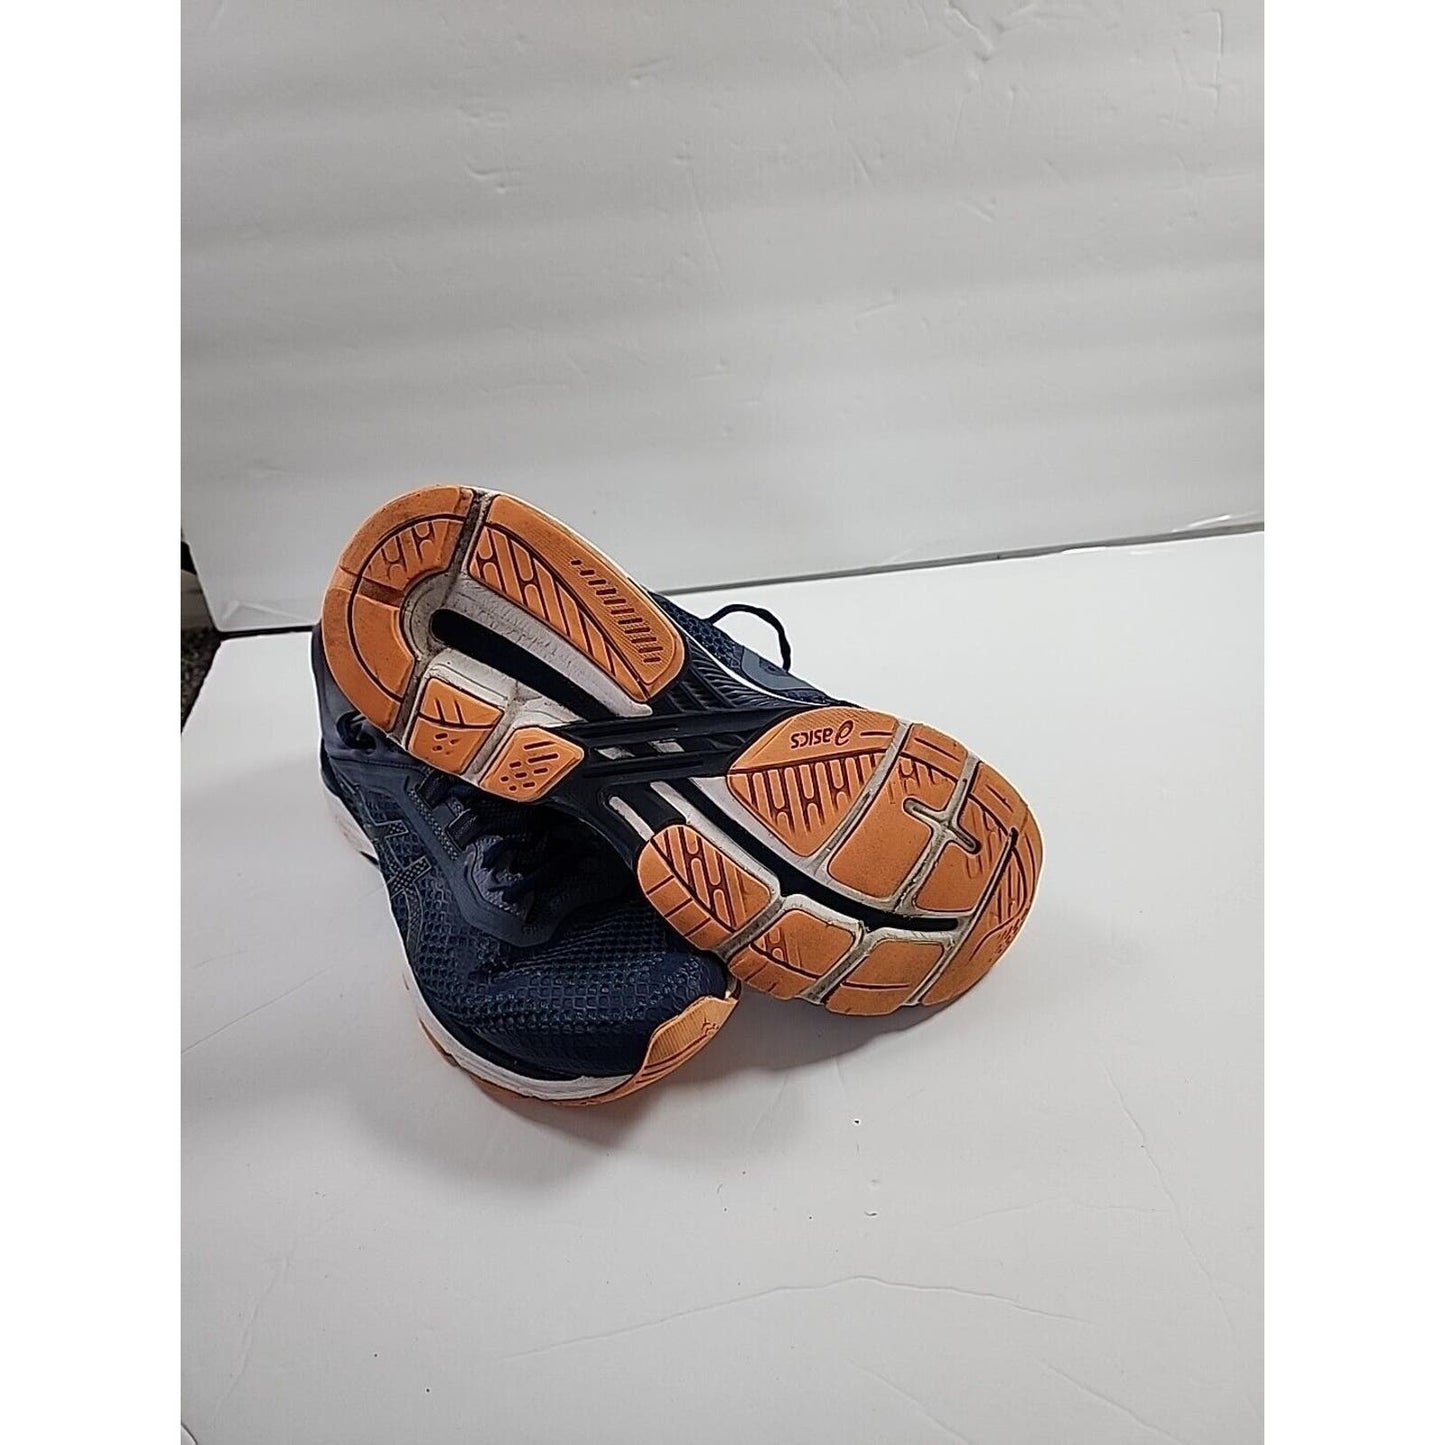 Asics Shoes Mens Size 10.5 GT-2000 6 Navy Orange Low Top Running Sneakers